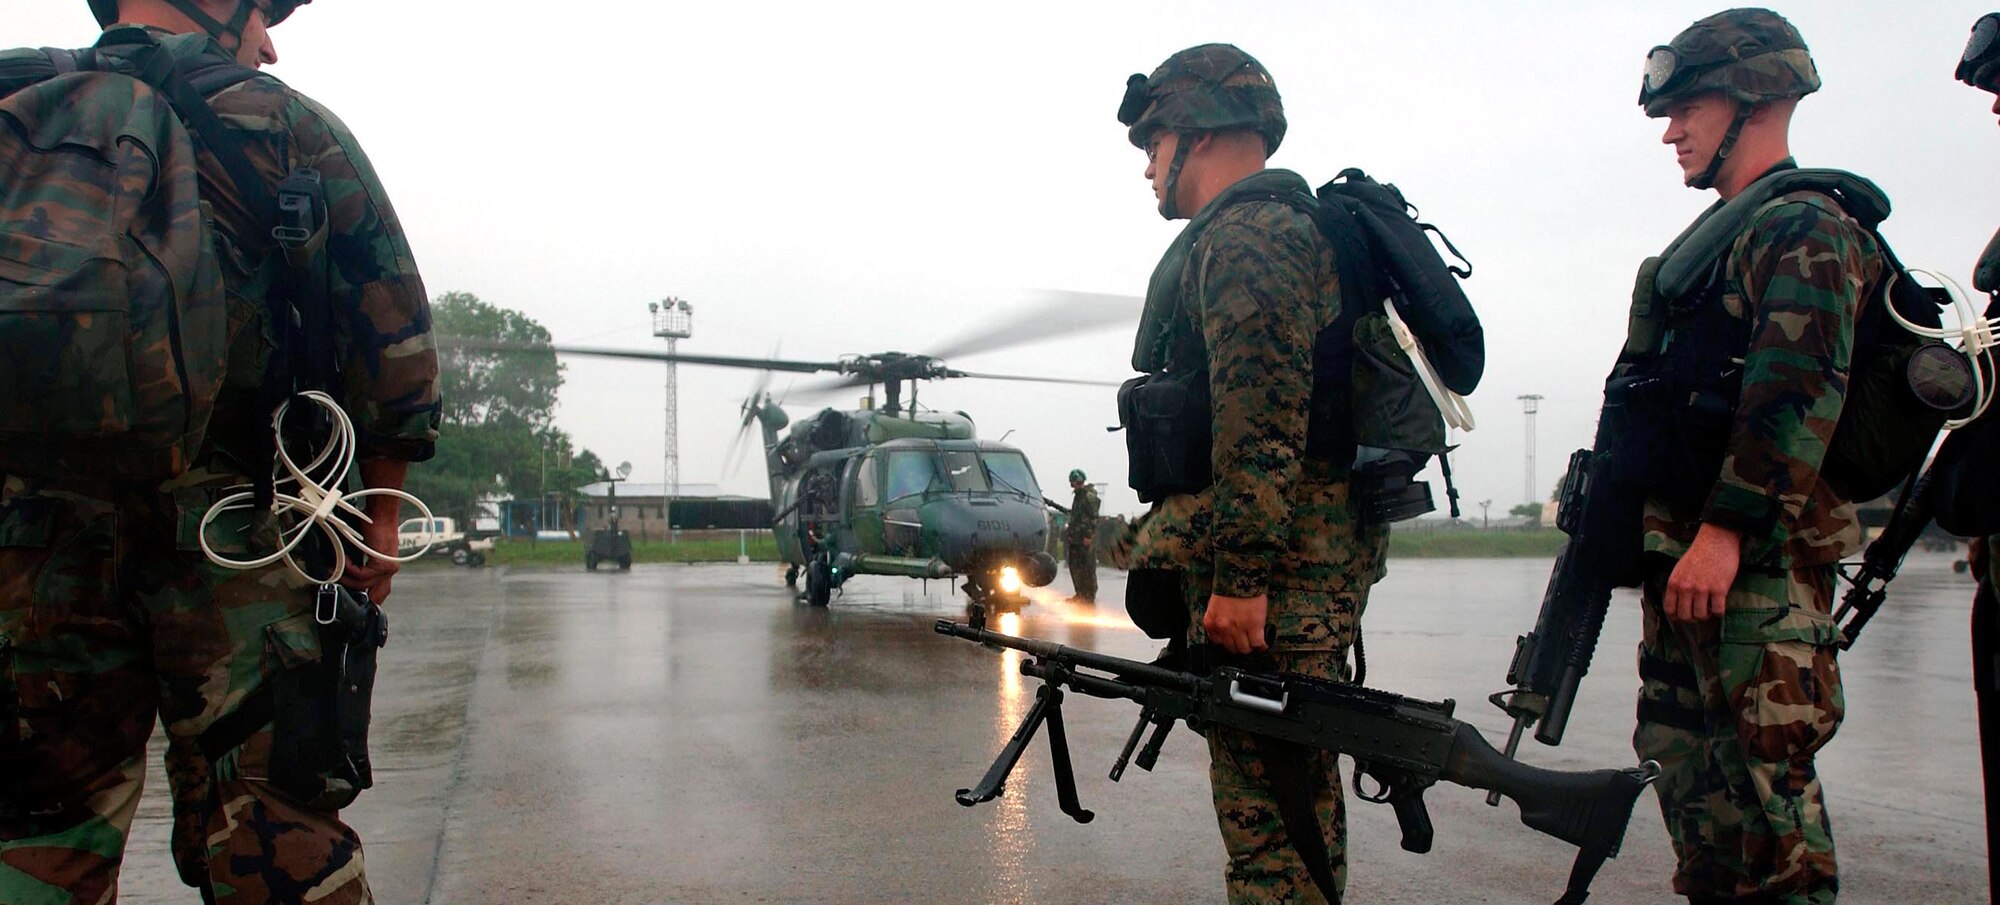 LUNGI, Sierra Leone -- Marines prepare to board an Air Force HH-60G Pave Hawk helicopter here July 21.  The Marines are part of an antiterrorism security team augmenting security at the U.S. Embassy in Monrovia, Liberia.  The helicopters are deployed form Naval Air Station Keflavik, Iceland, as part of the 398th Air Expeditionary Group.  The group provides recovery and emergency evacuation capabilities in Liberia.  (U.S. Air Force photo by Tech. Sgt. Justin D. Pyle)